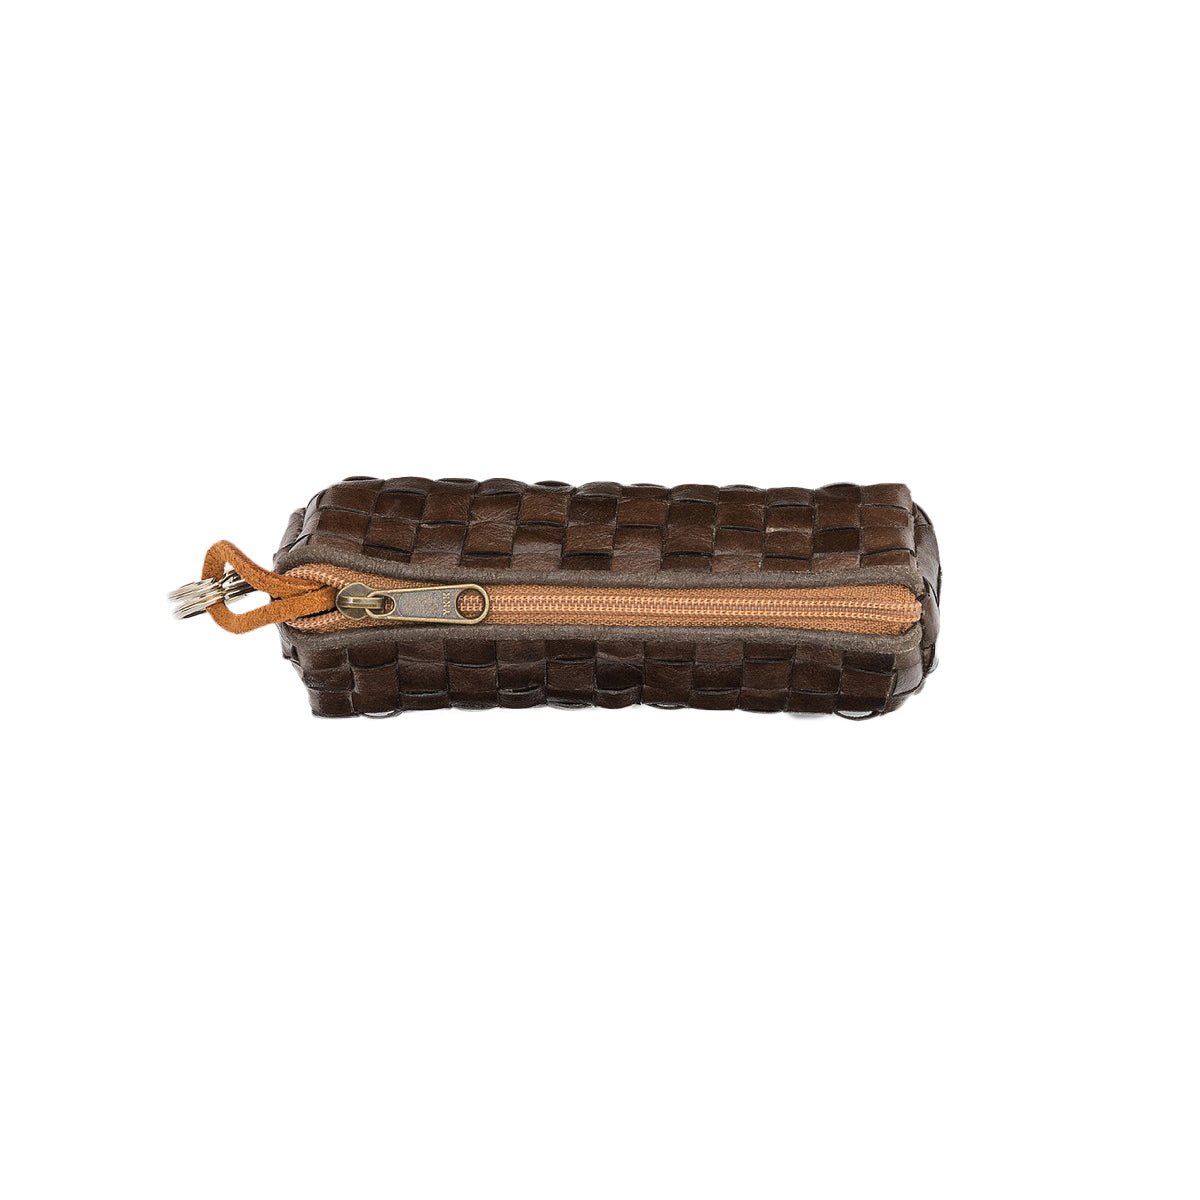 A chocolate brown washable paper woven key holder is shown from the top angle, zipped shut.